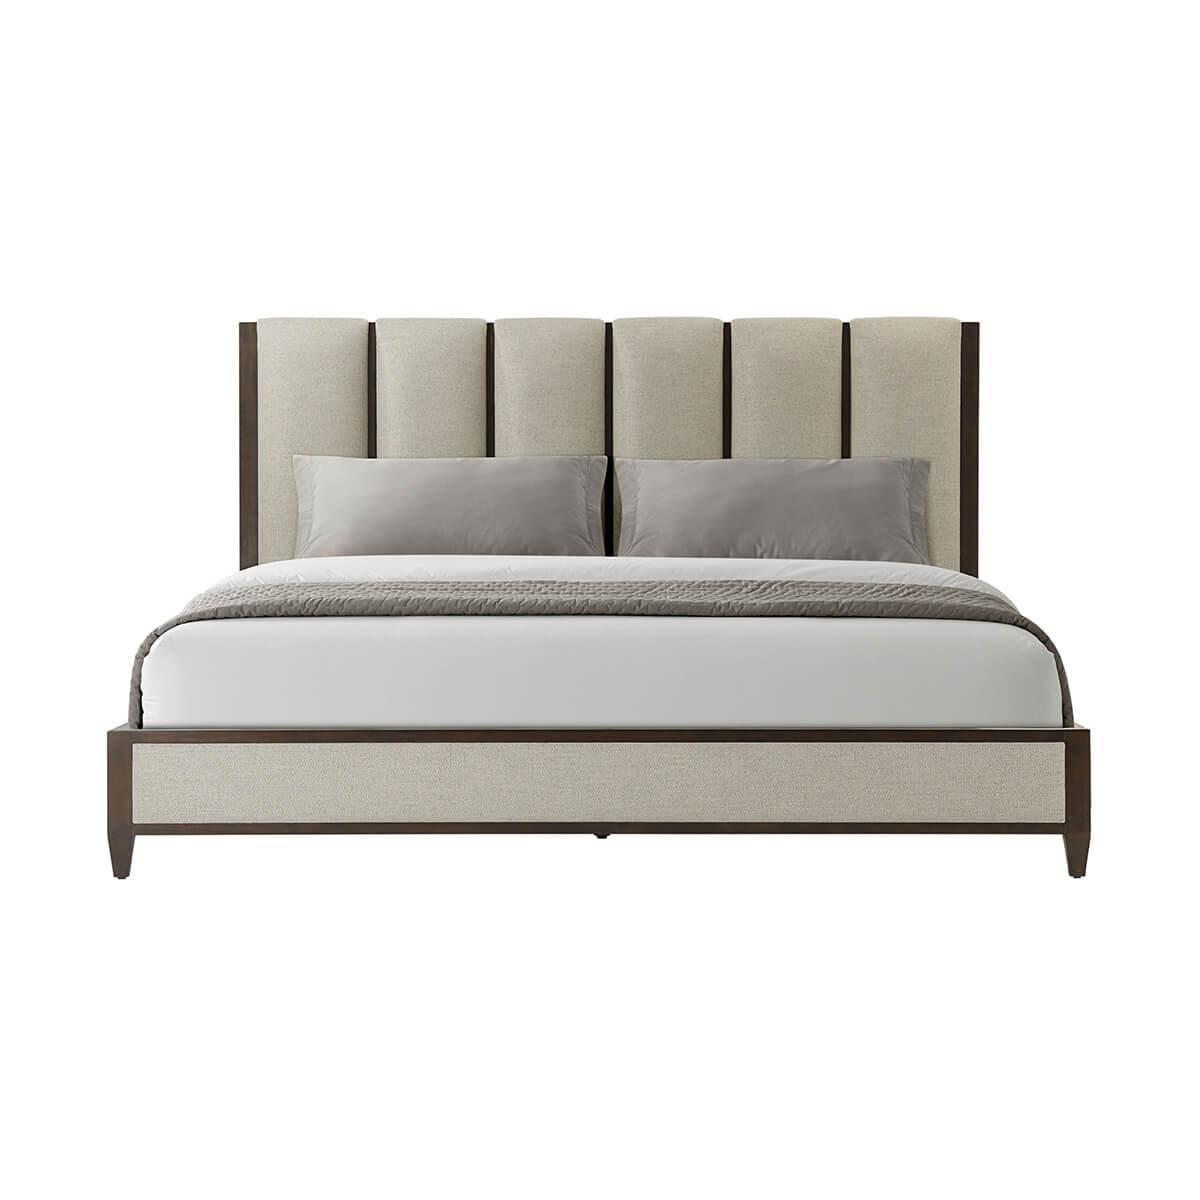 Featuring an upholstered platform frame and sophisticated channeled headboard, set within the dark Bistre finish.

Dimensions: 64